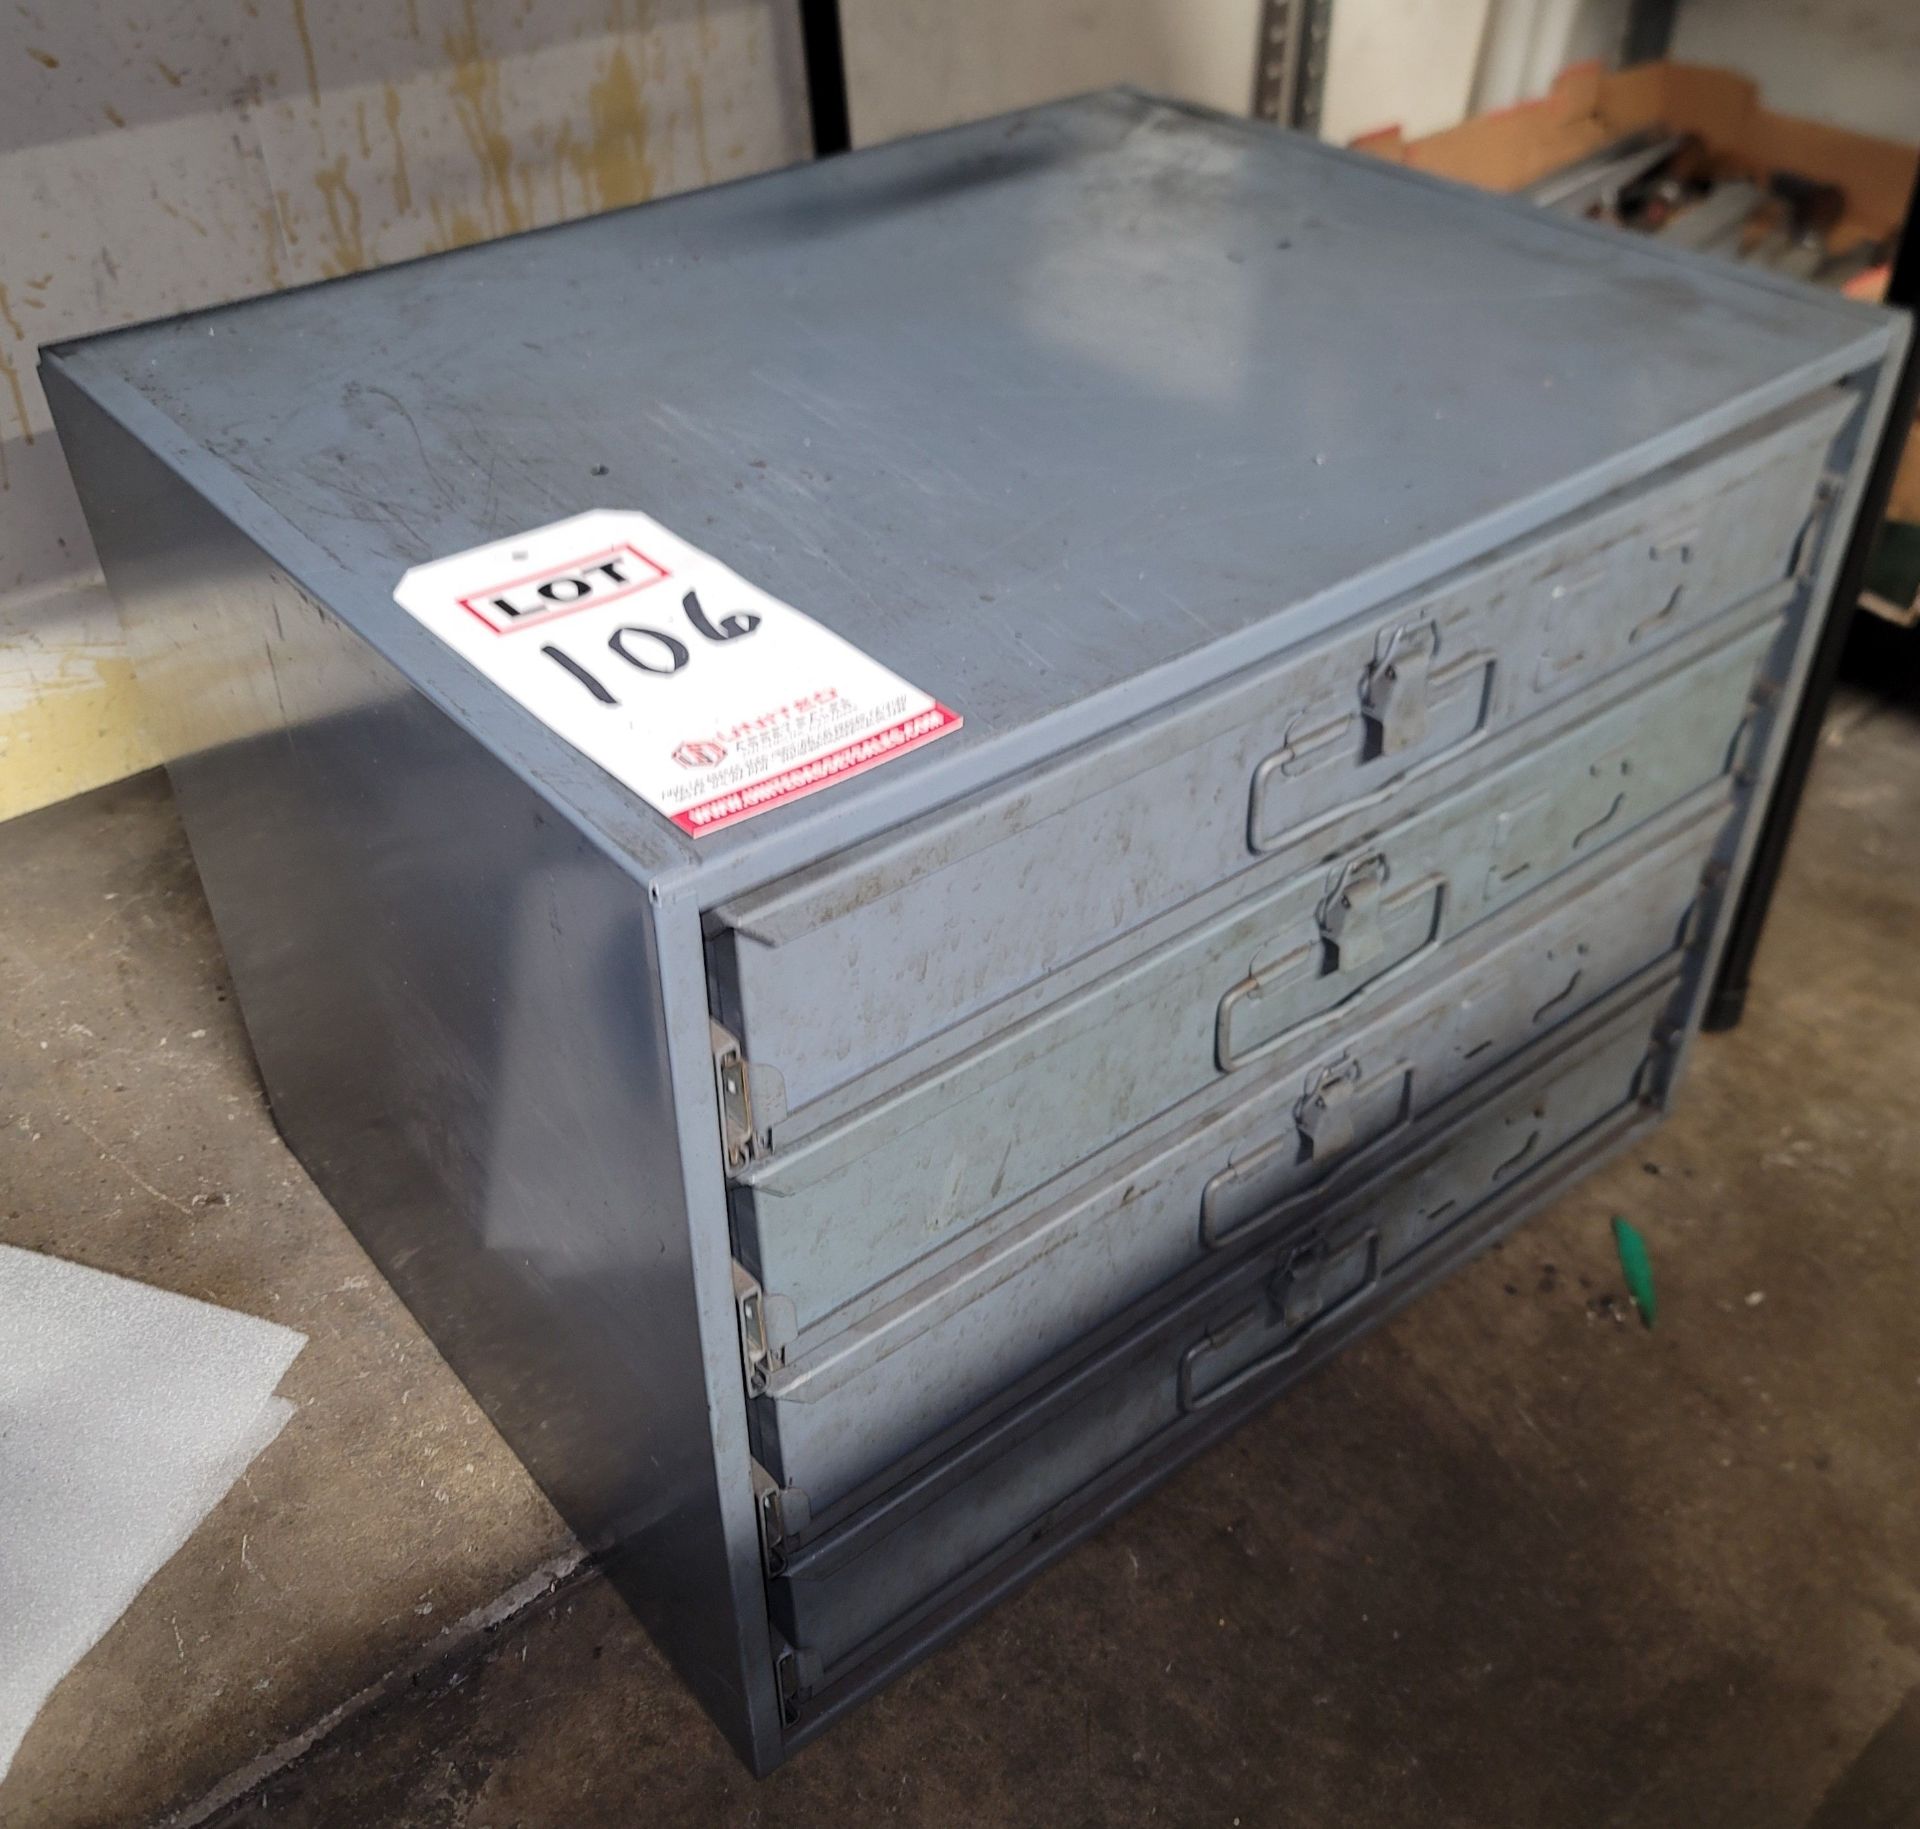 LOT - 4-DRAWER SMALL HARDWARE CABINET, W/ CONTENTS: SET SCREWS, CARRIAGE BOLTS, DOWELS, ETC.